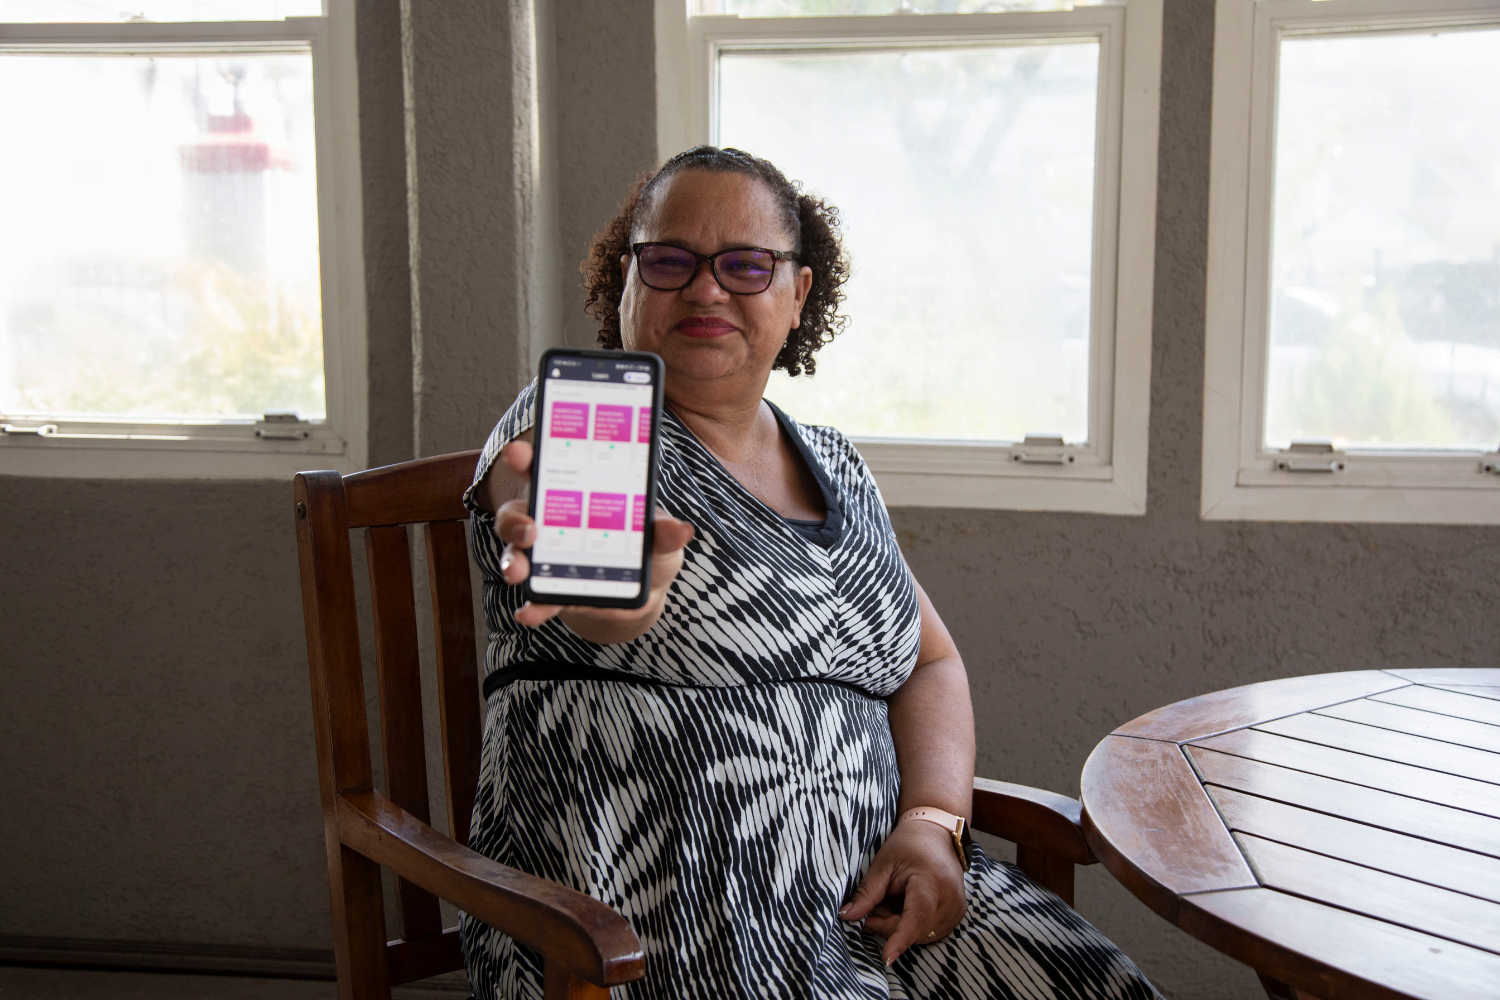 A woman entrepreneur, Ivonne Ocrospoma, sits in a wooden chair in front of a window. She is wearing a black and white dress with plant patterns on it. She is holding out a phone with the HerVenture app on the screen and she is smiling.